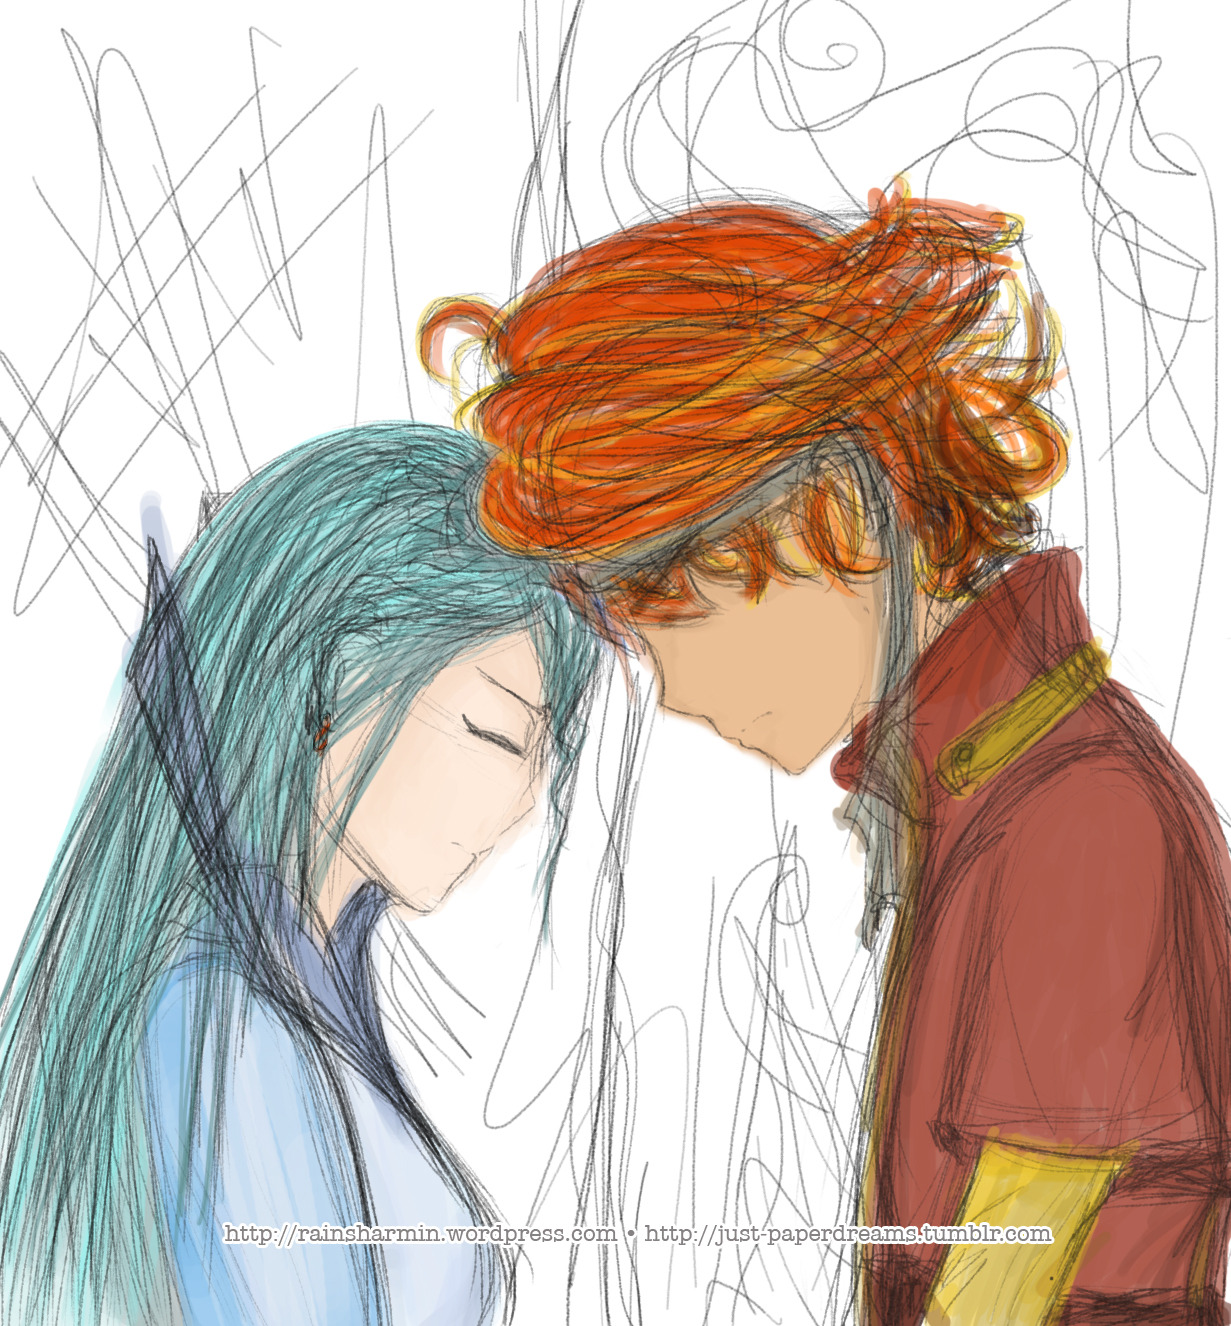 fire and ice. (rough sketch of characters from my WIP novel)